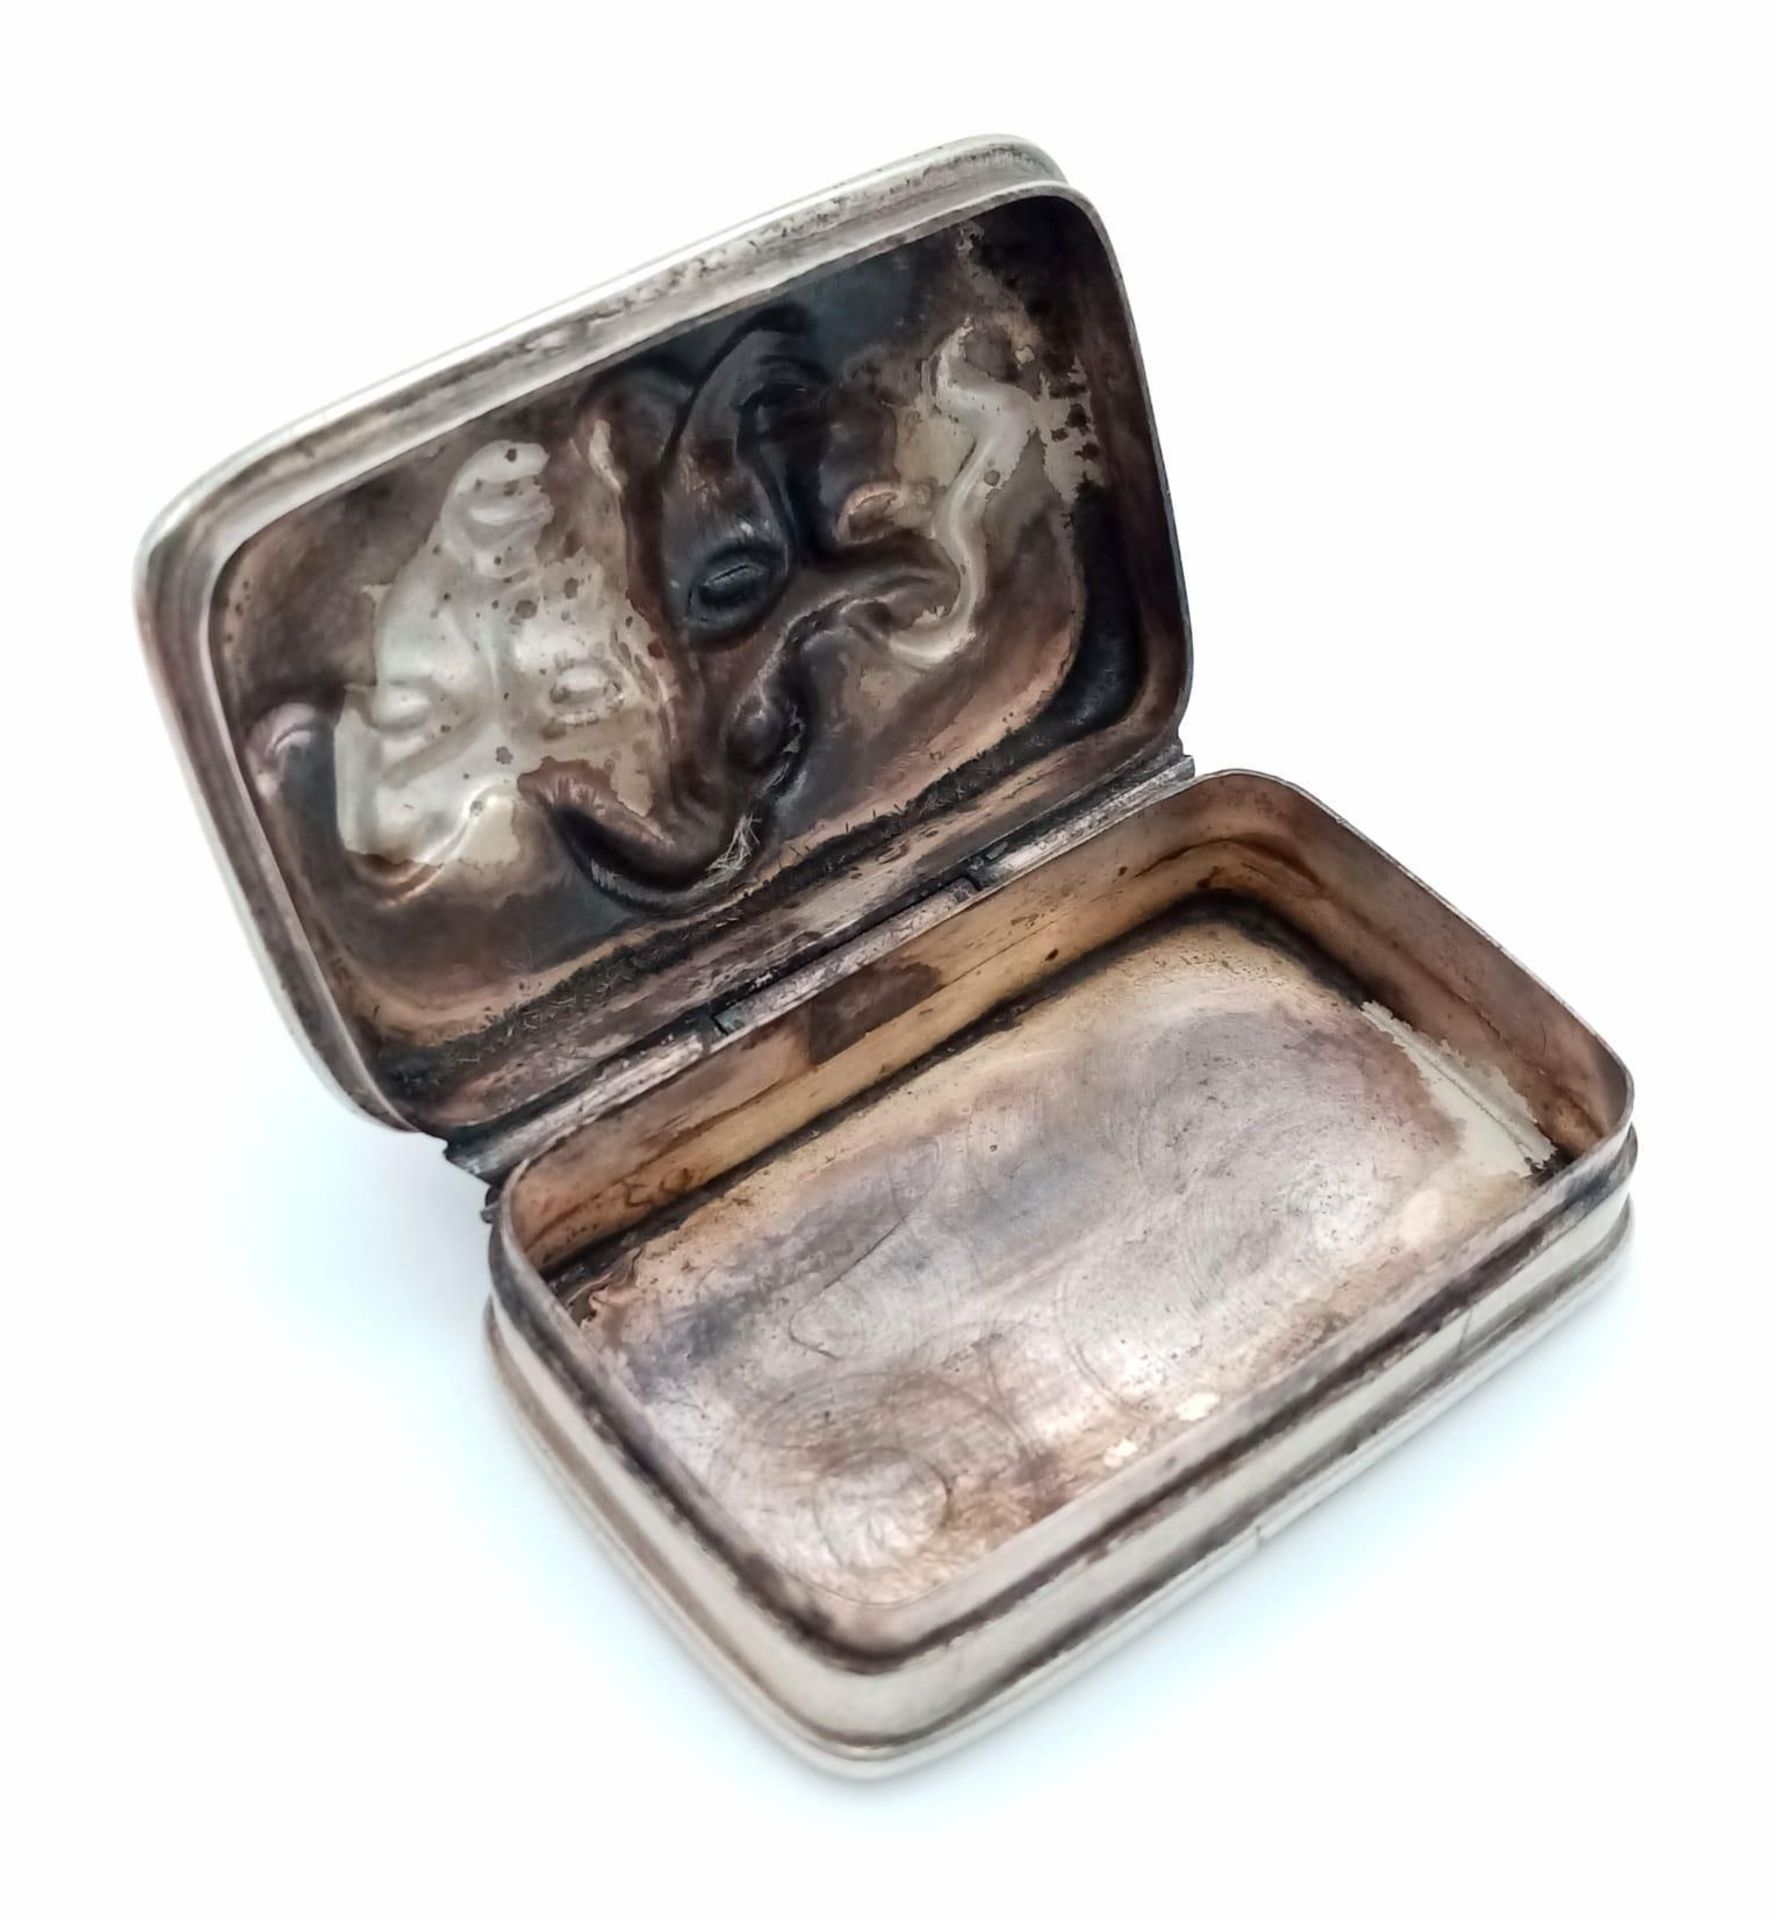 A Vintage Pin/Pill Silver Box with a Pair of Ornate Decorative Theatre Masks on Lid. 4 x 2.5cm. - Image 2 of 4